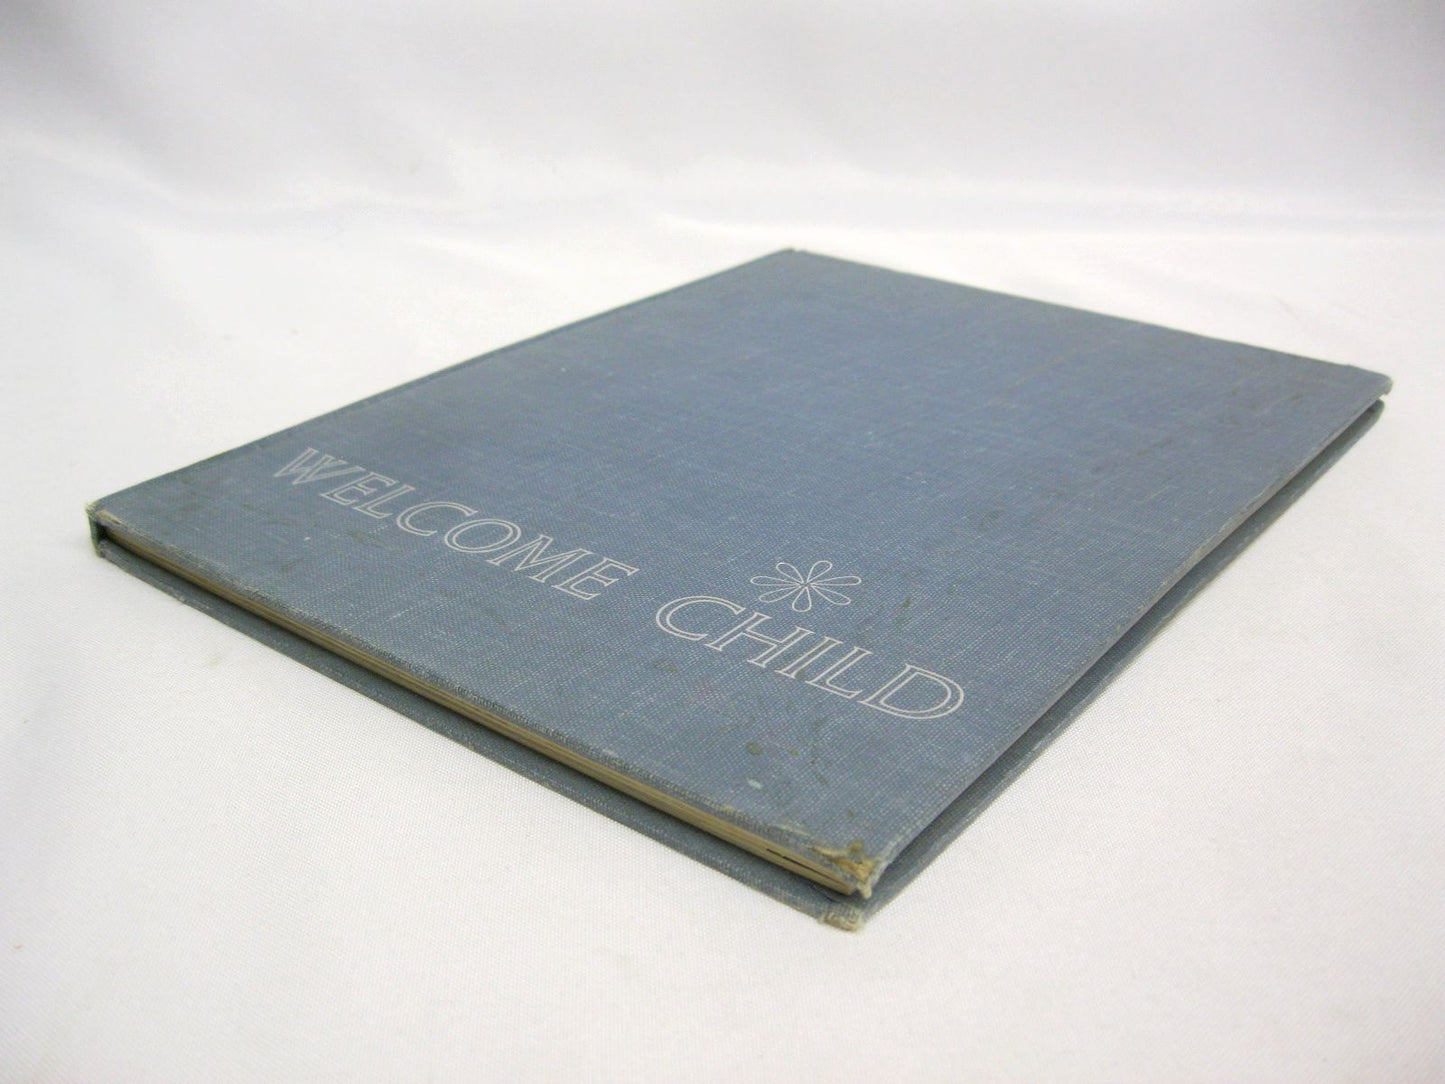 Welcome Child by Pearl S. Buck